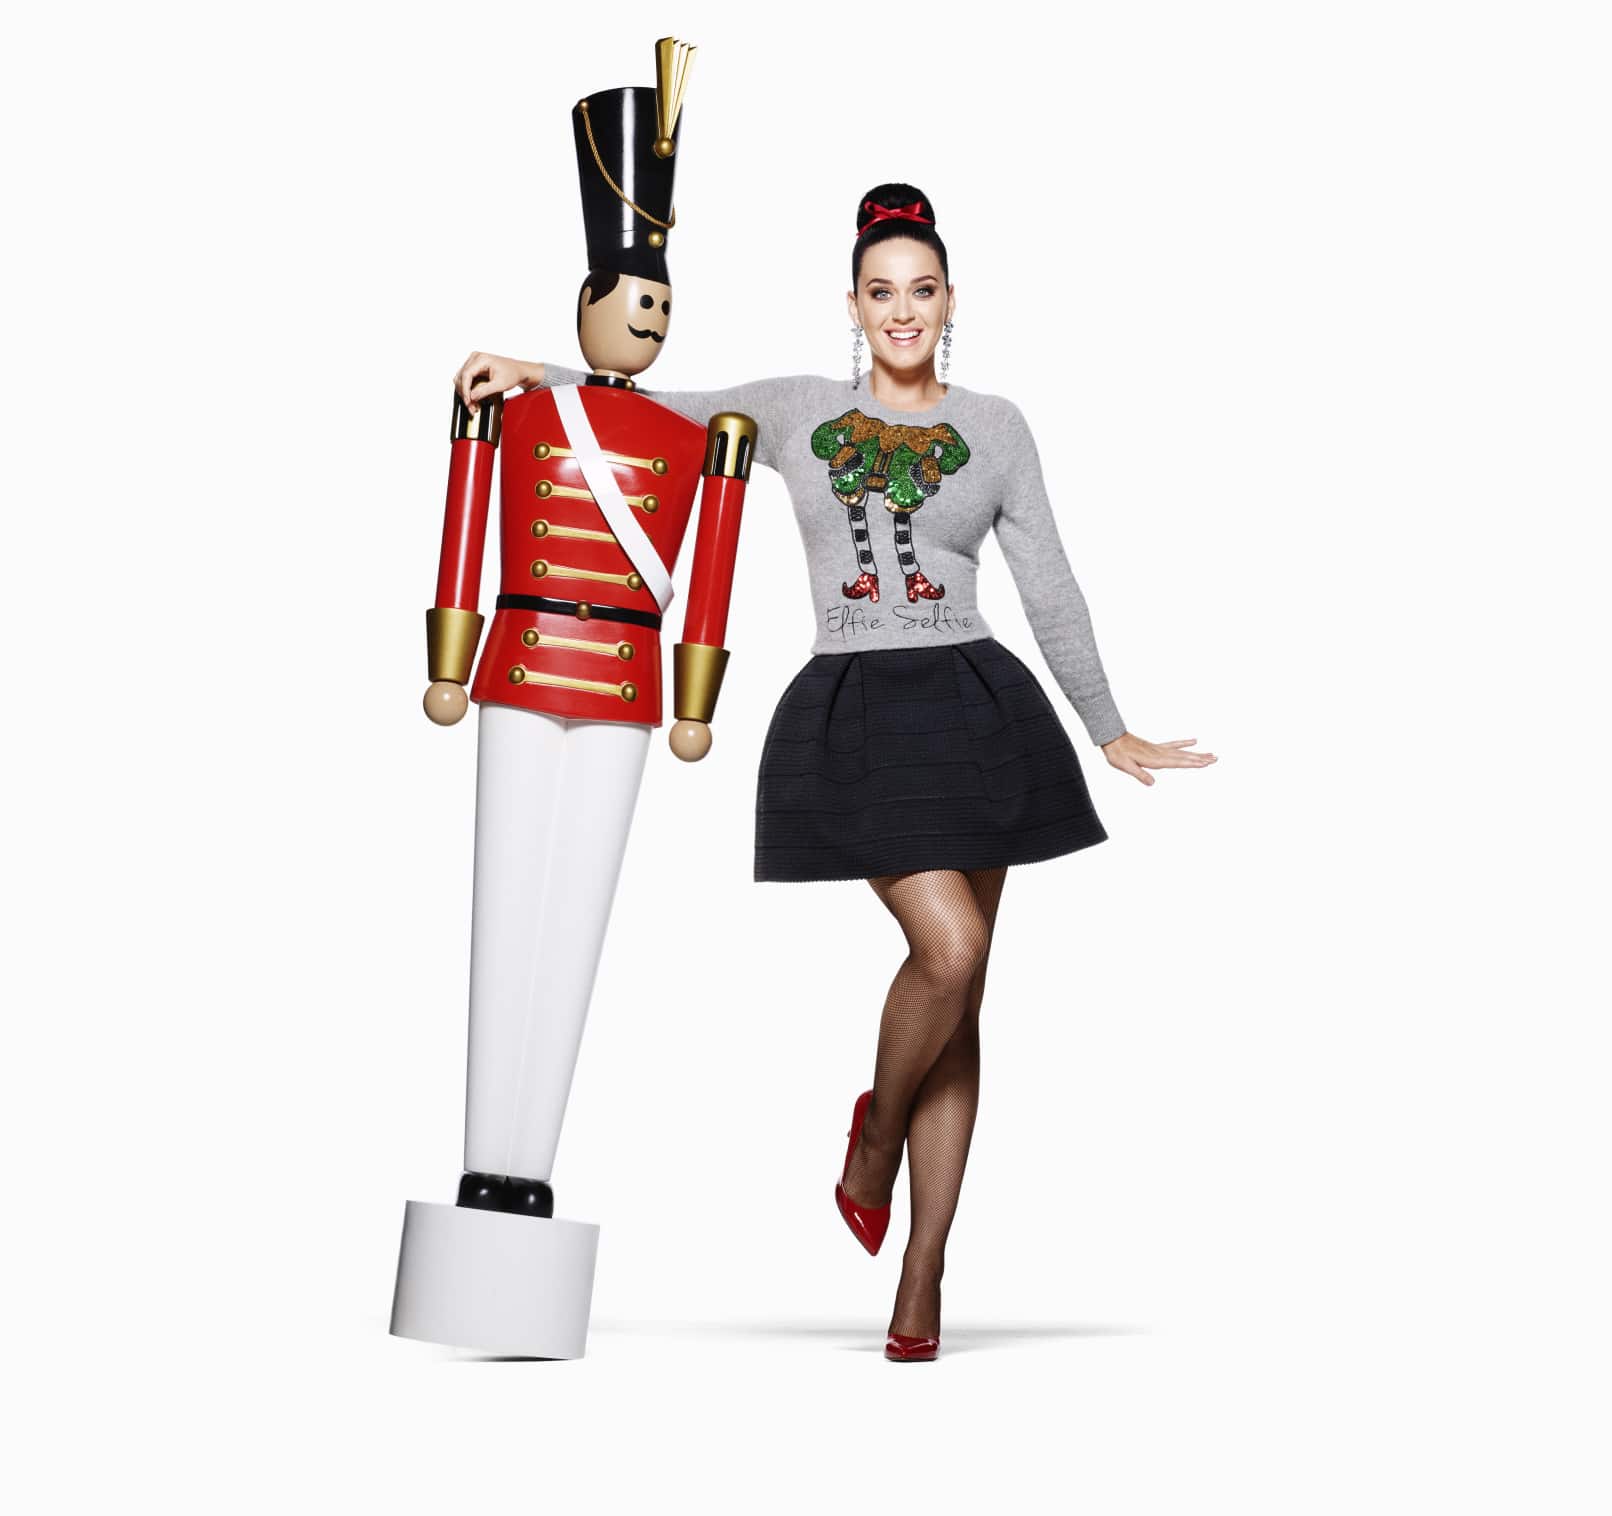 H&M Natale 2015 Katy Perry